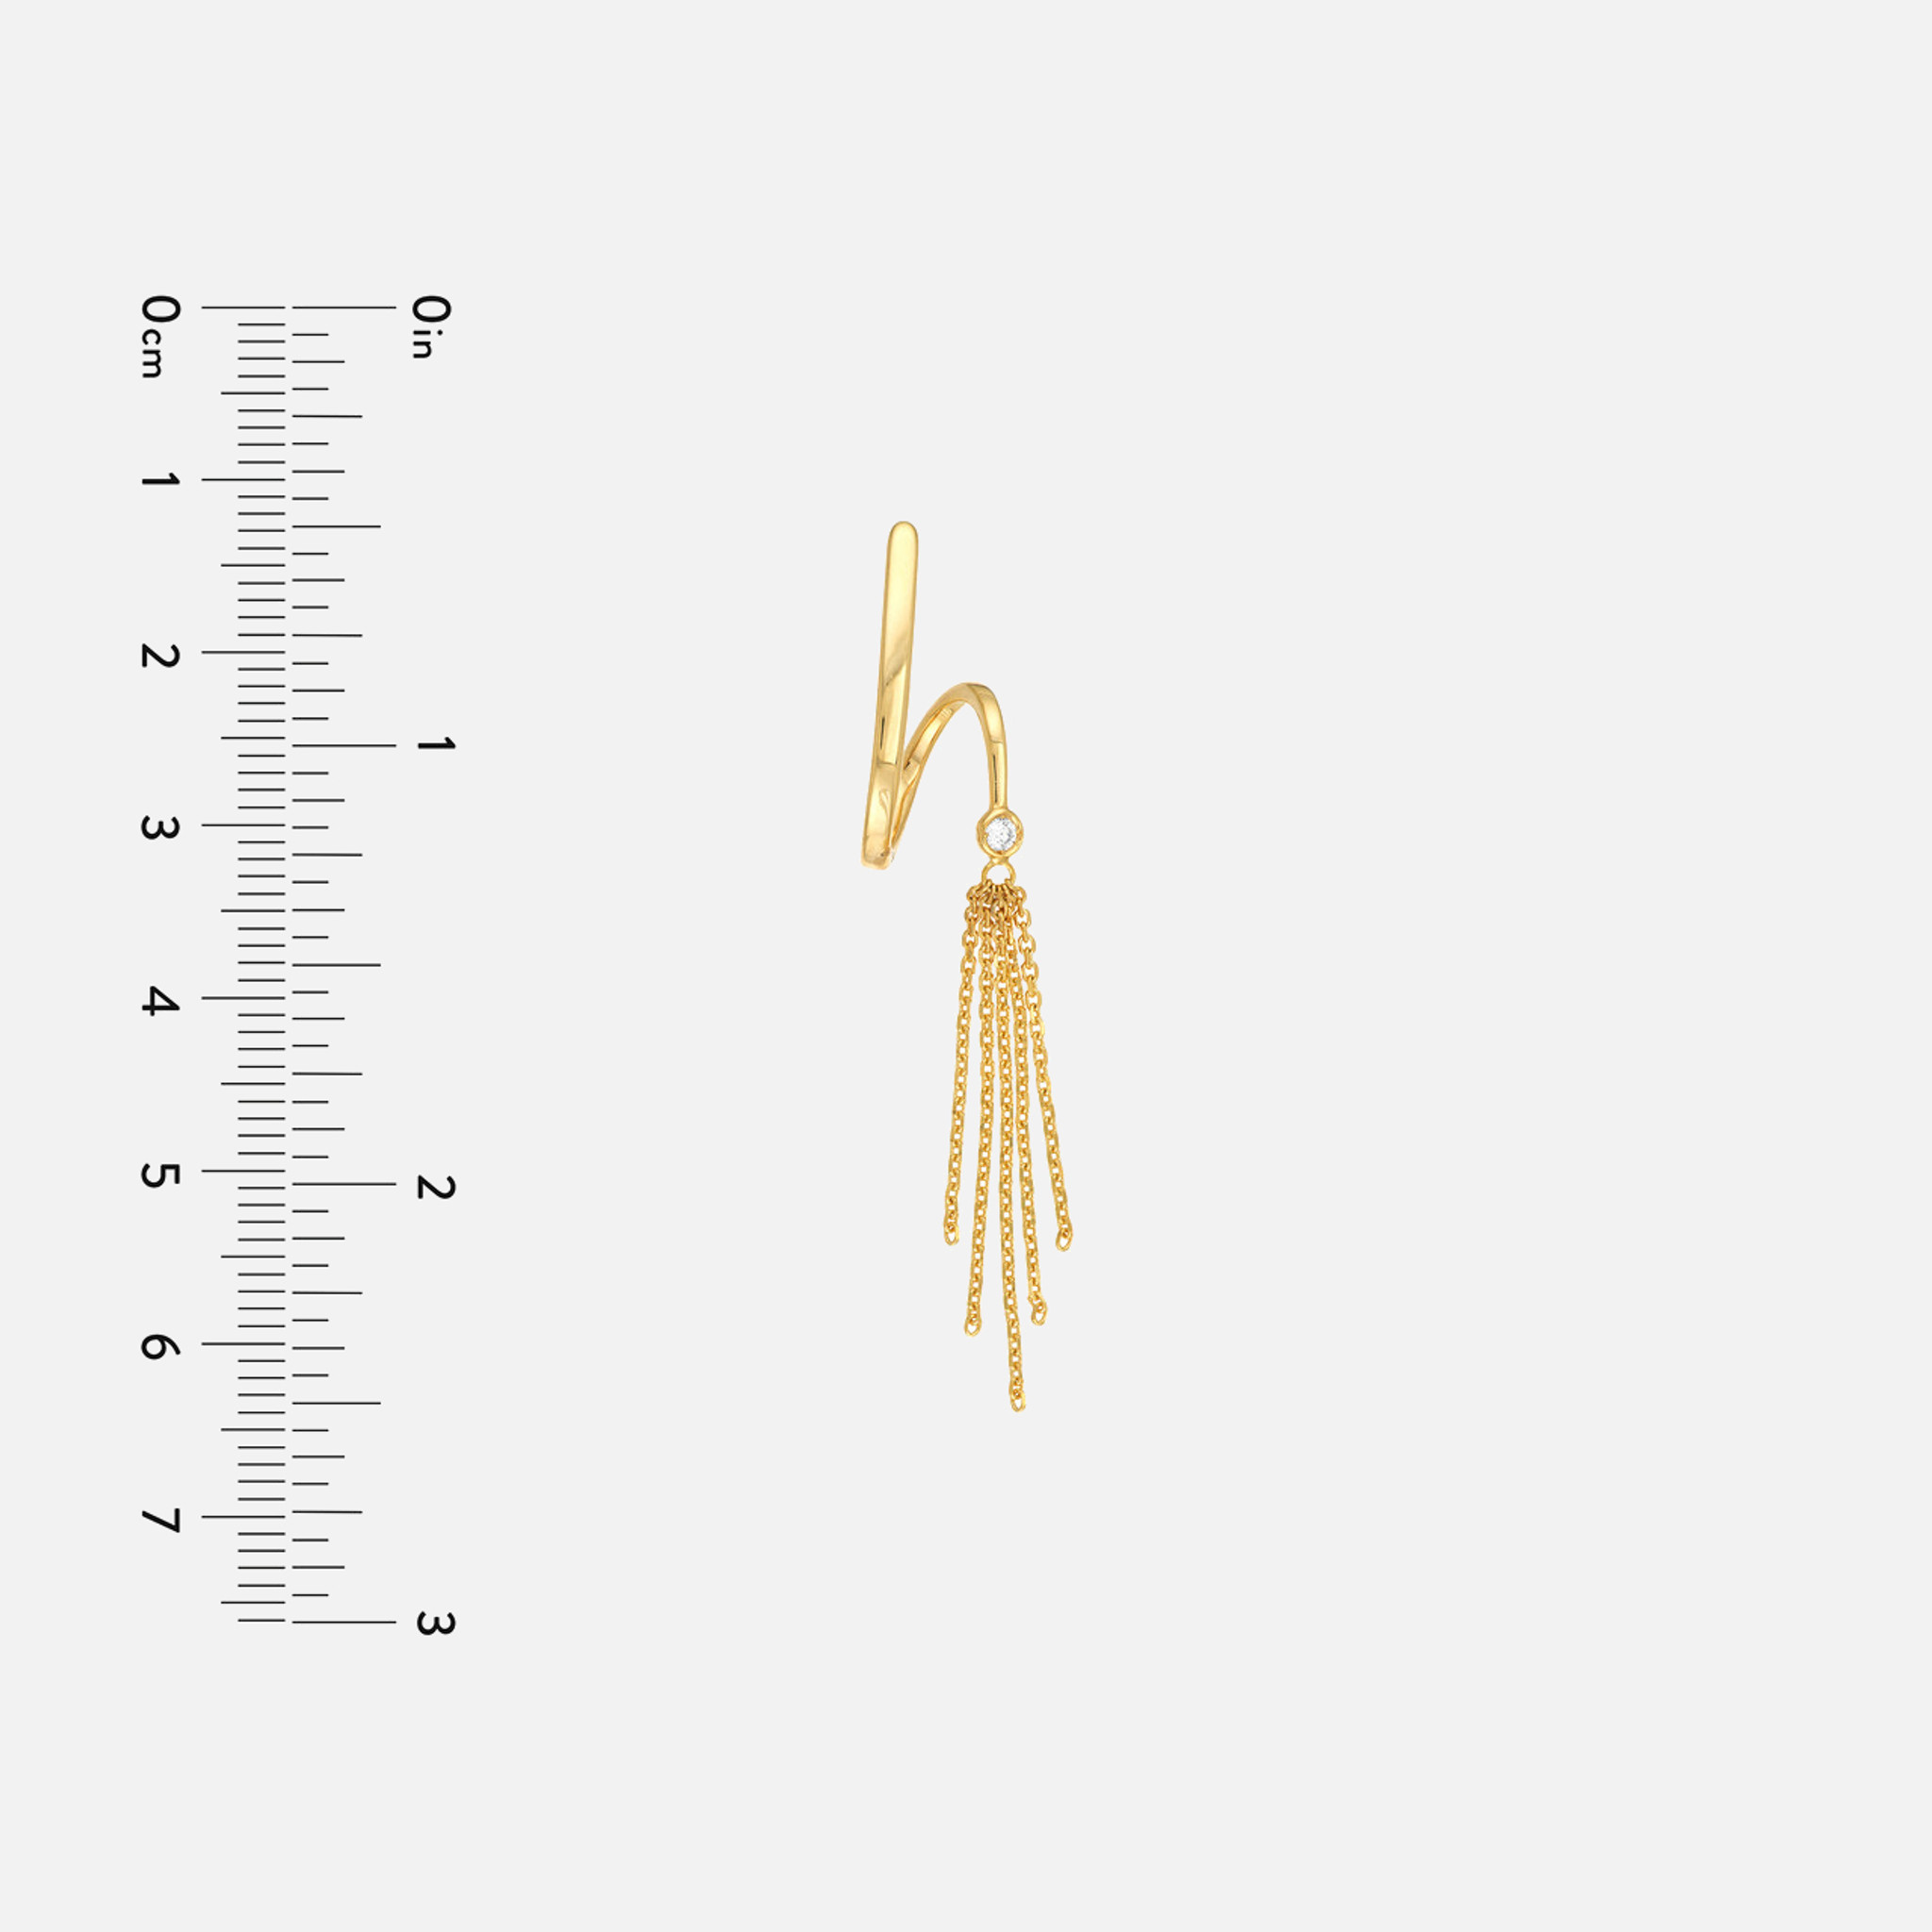 Gold tassel earrings beside a ruler for measurement, displaying a width of 0.95mm.